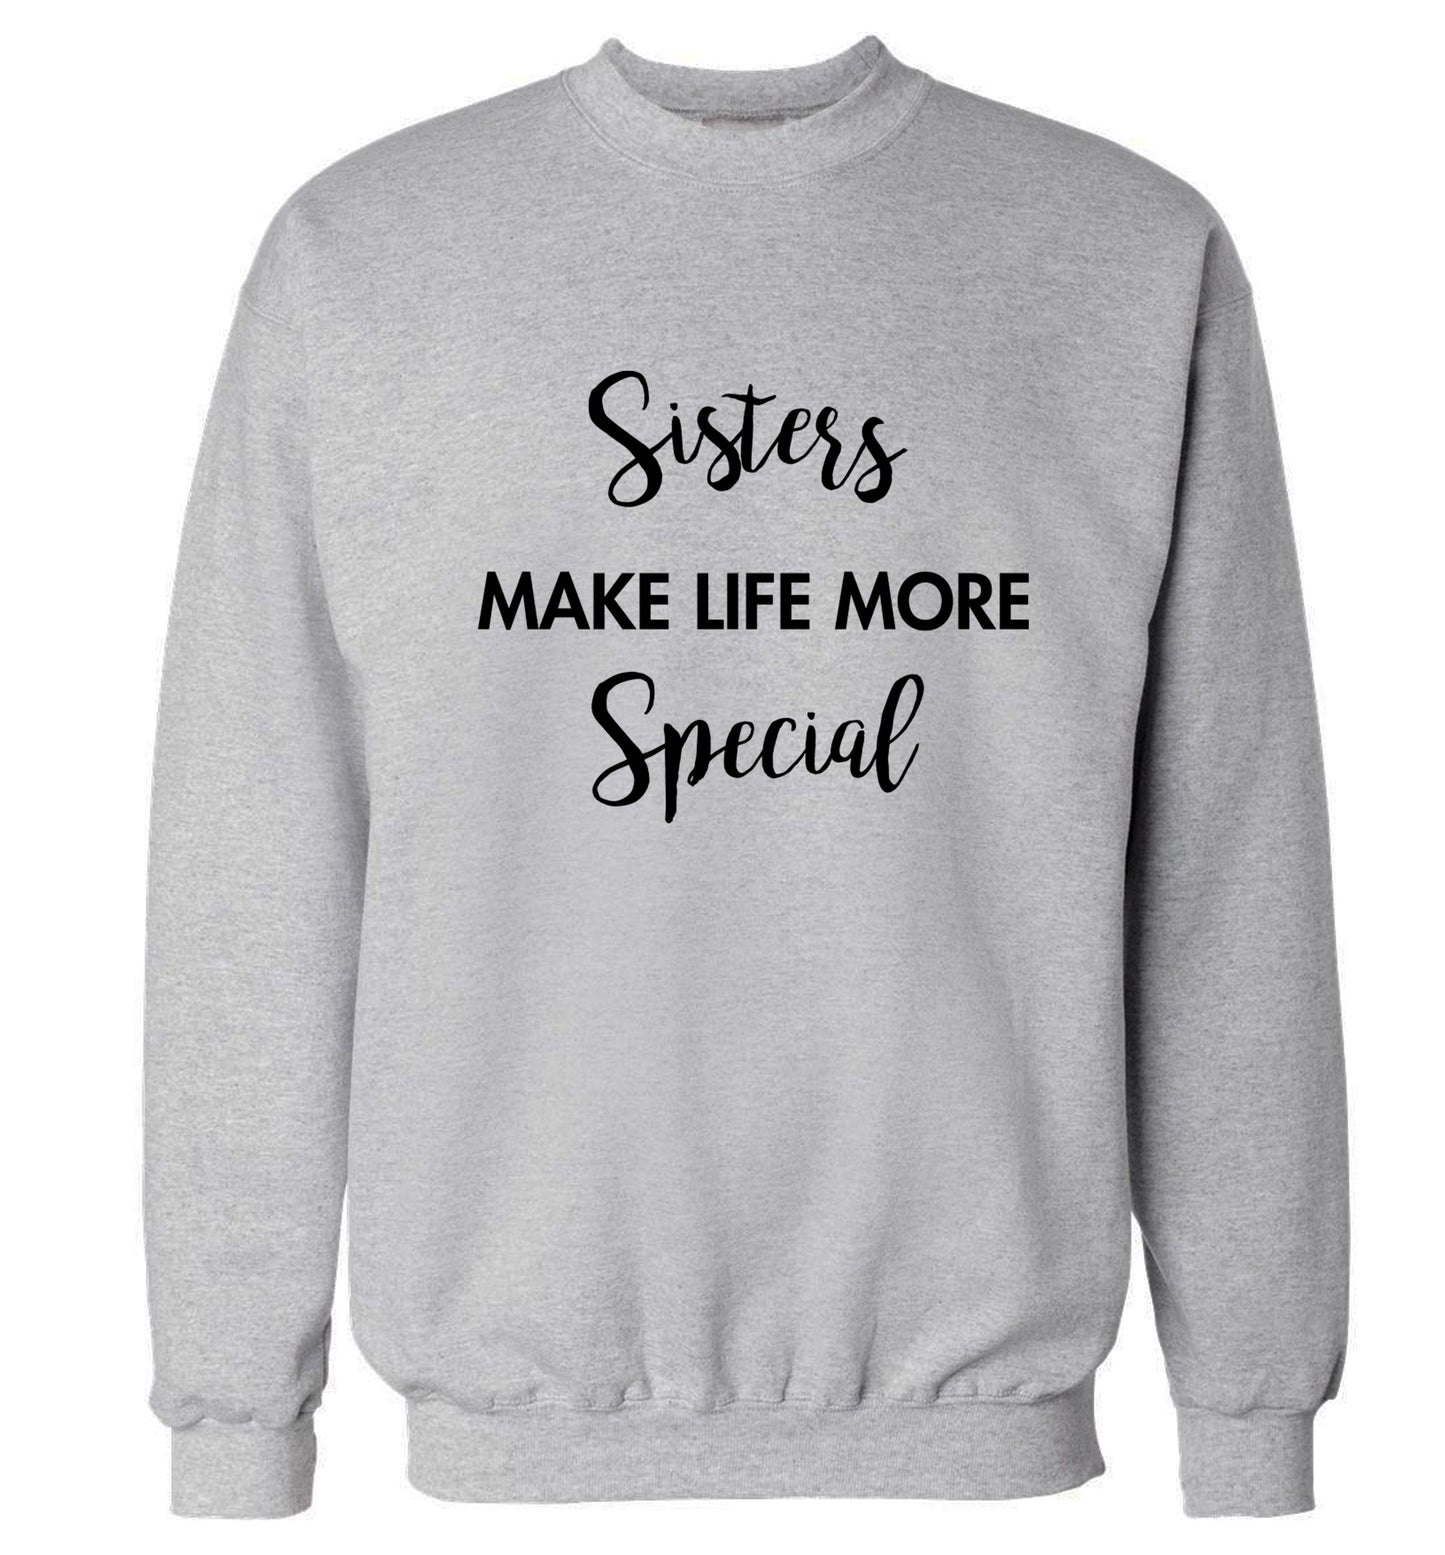 Sisters make life more special Adult's unisex grey Sweater 2XL